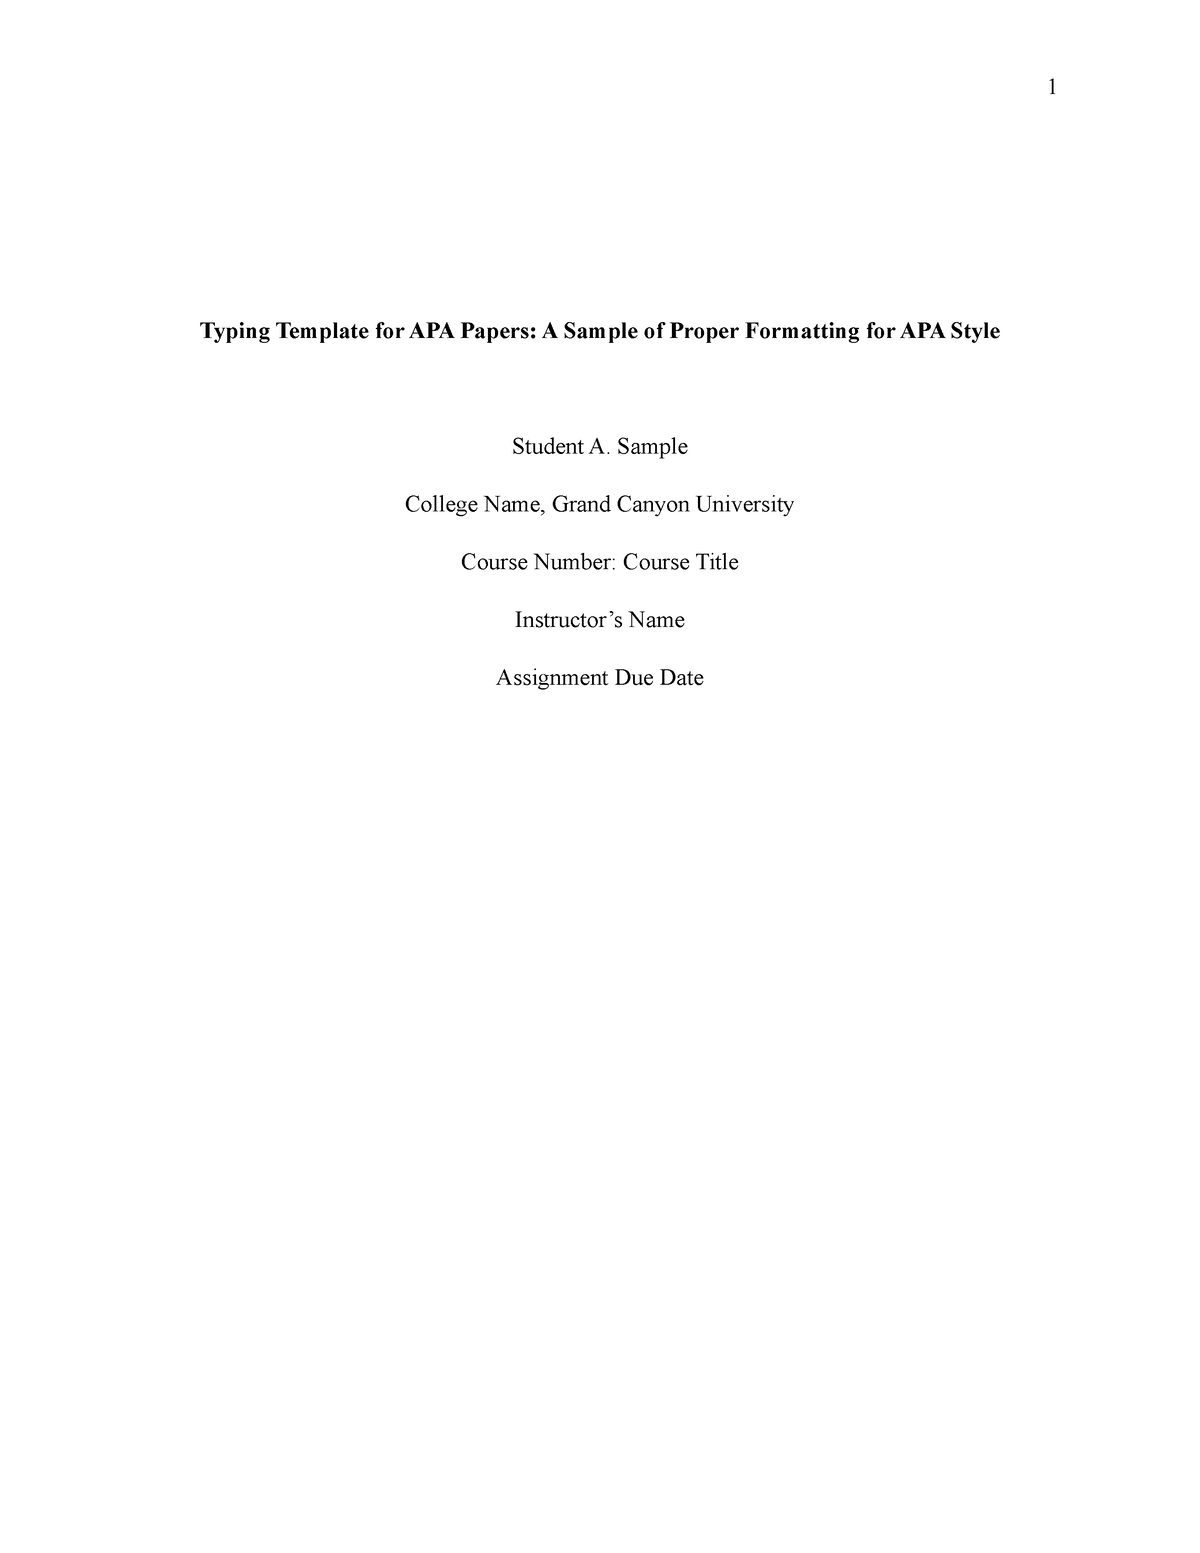 APA template for GCU Typing Template for APA Papers A Sample of